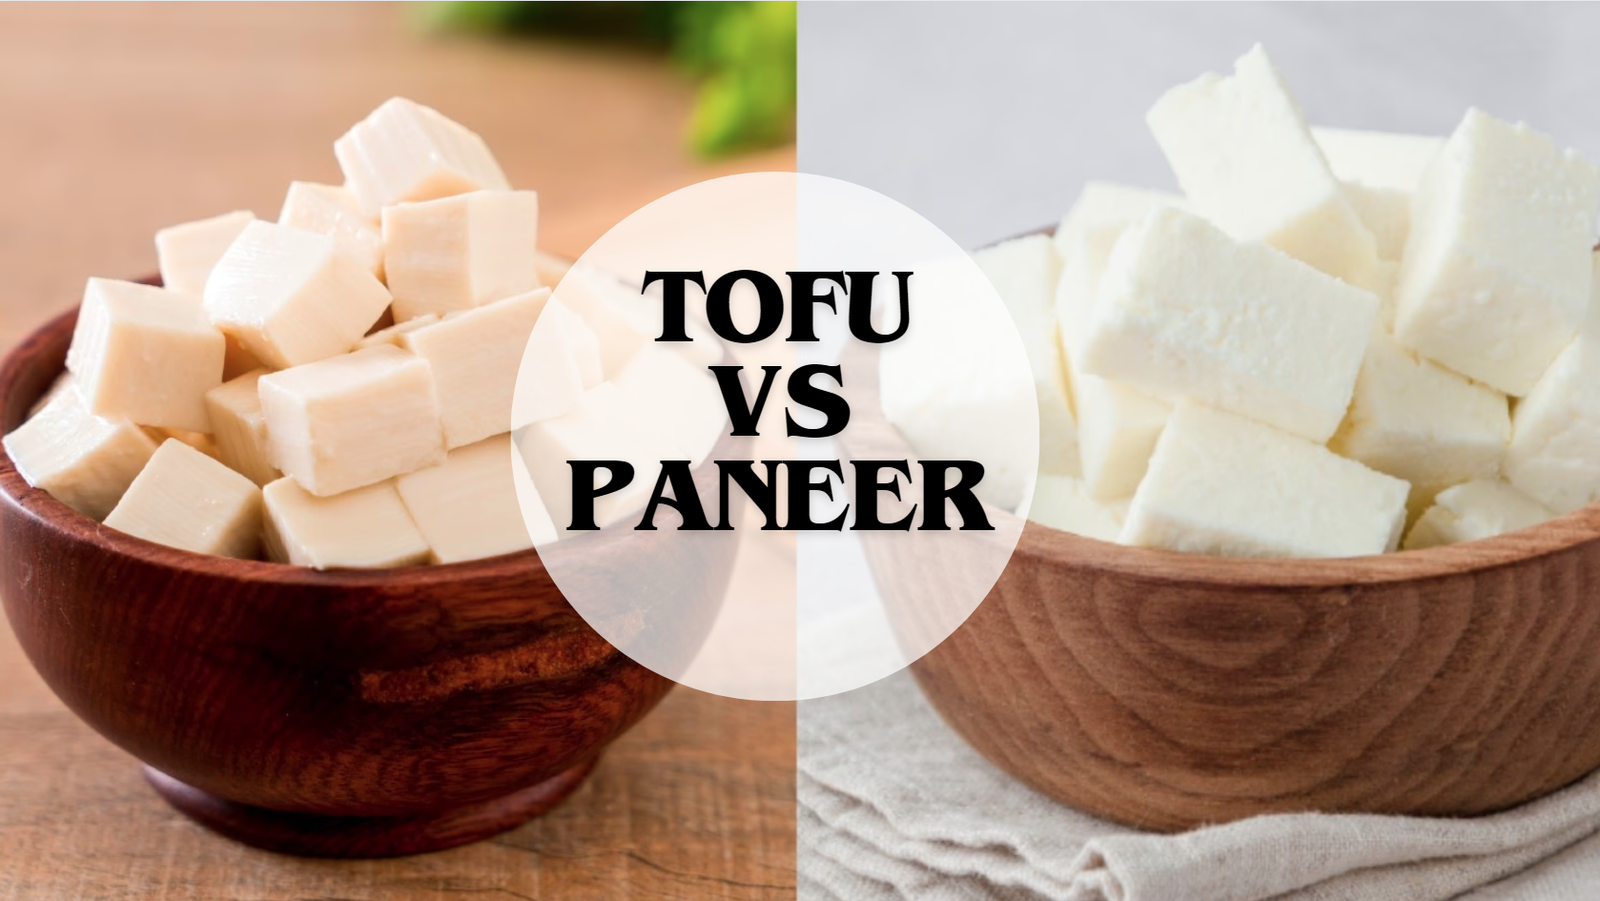 Tofu vs Paneer The Battle of Two Protein-Packed Giants